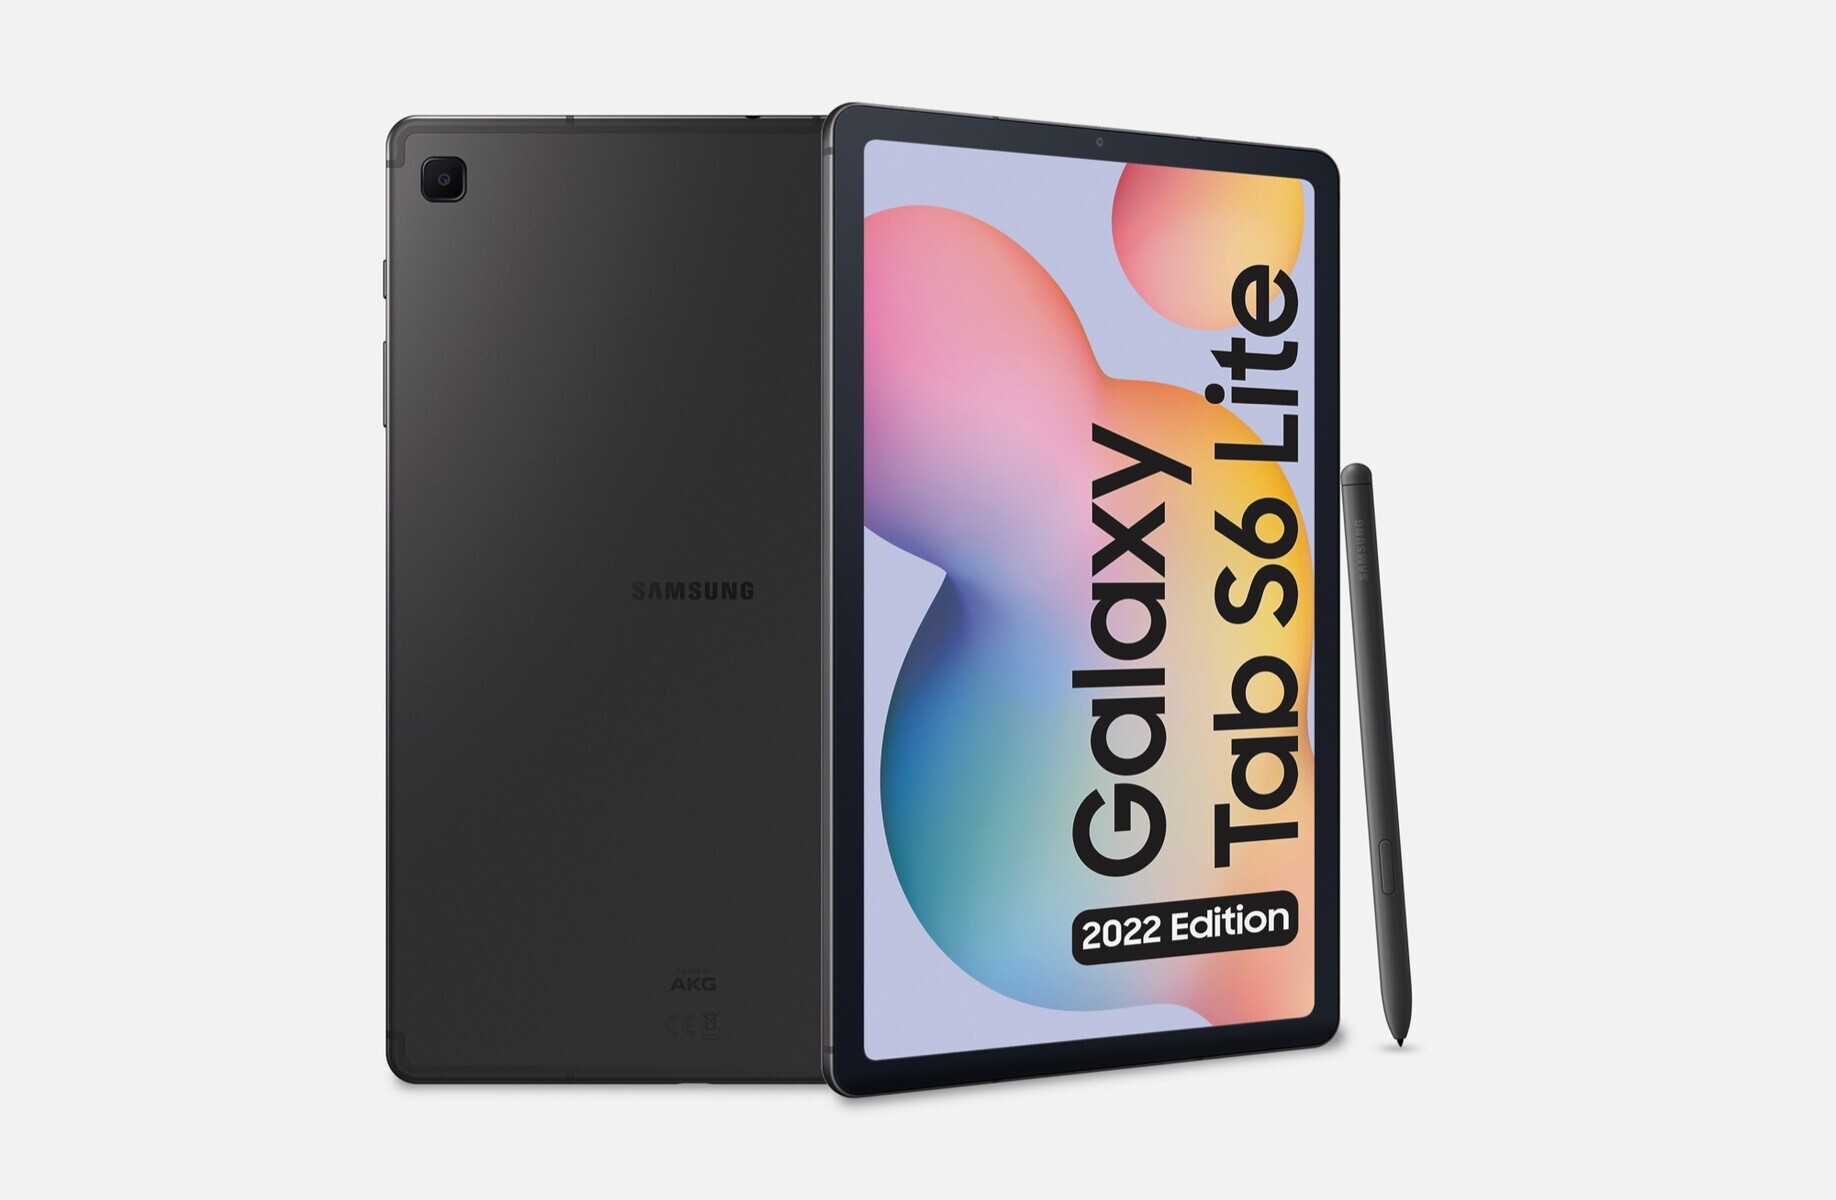 Samsung Galaxy Tab S6 Lite (2022 Edition) launches with Android 12, a  healthy performance boost and a free keyboard case for pre-orders -  NotebookCheck.net News | alle Tablets